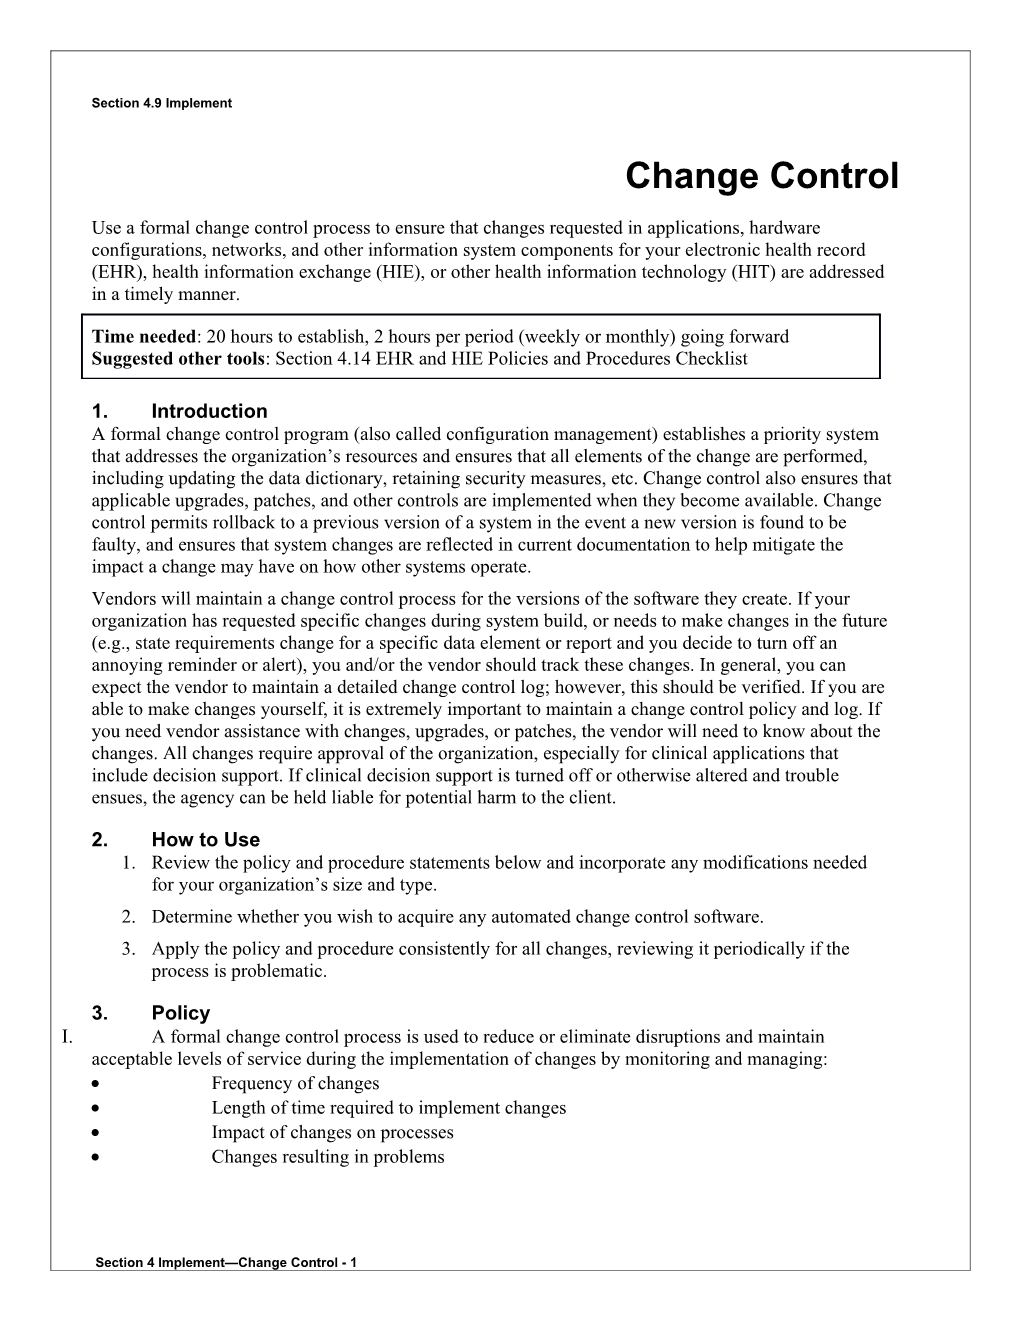 Section 4 Implement Change Control - 1